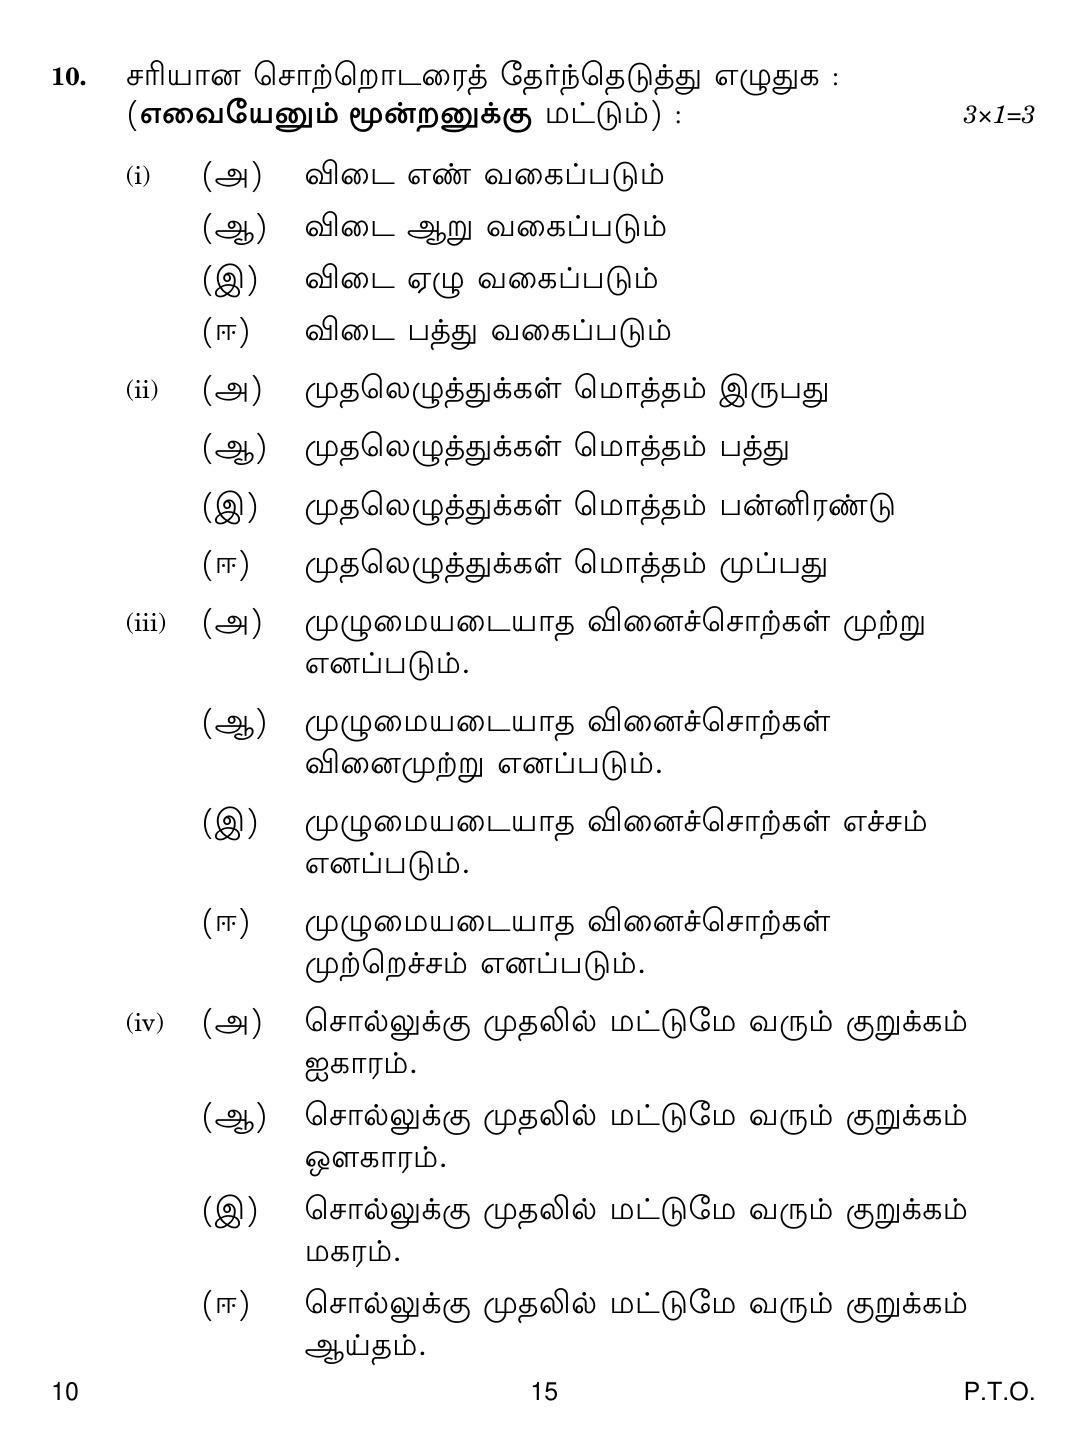 CBSE Class 10 10 Tamil 2019 Question Paper - Page 15